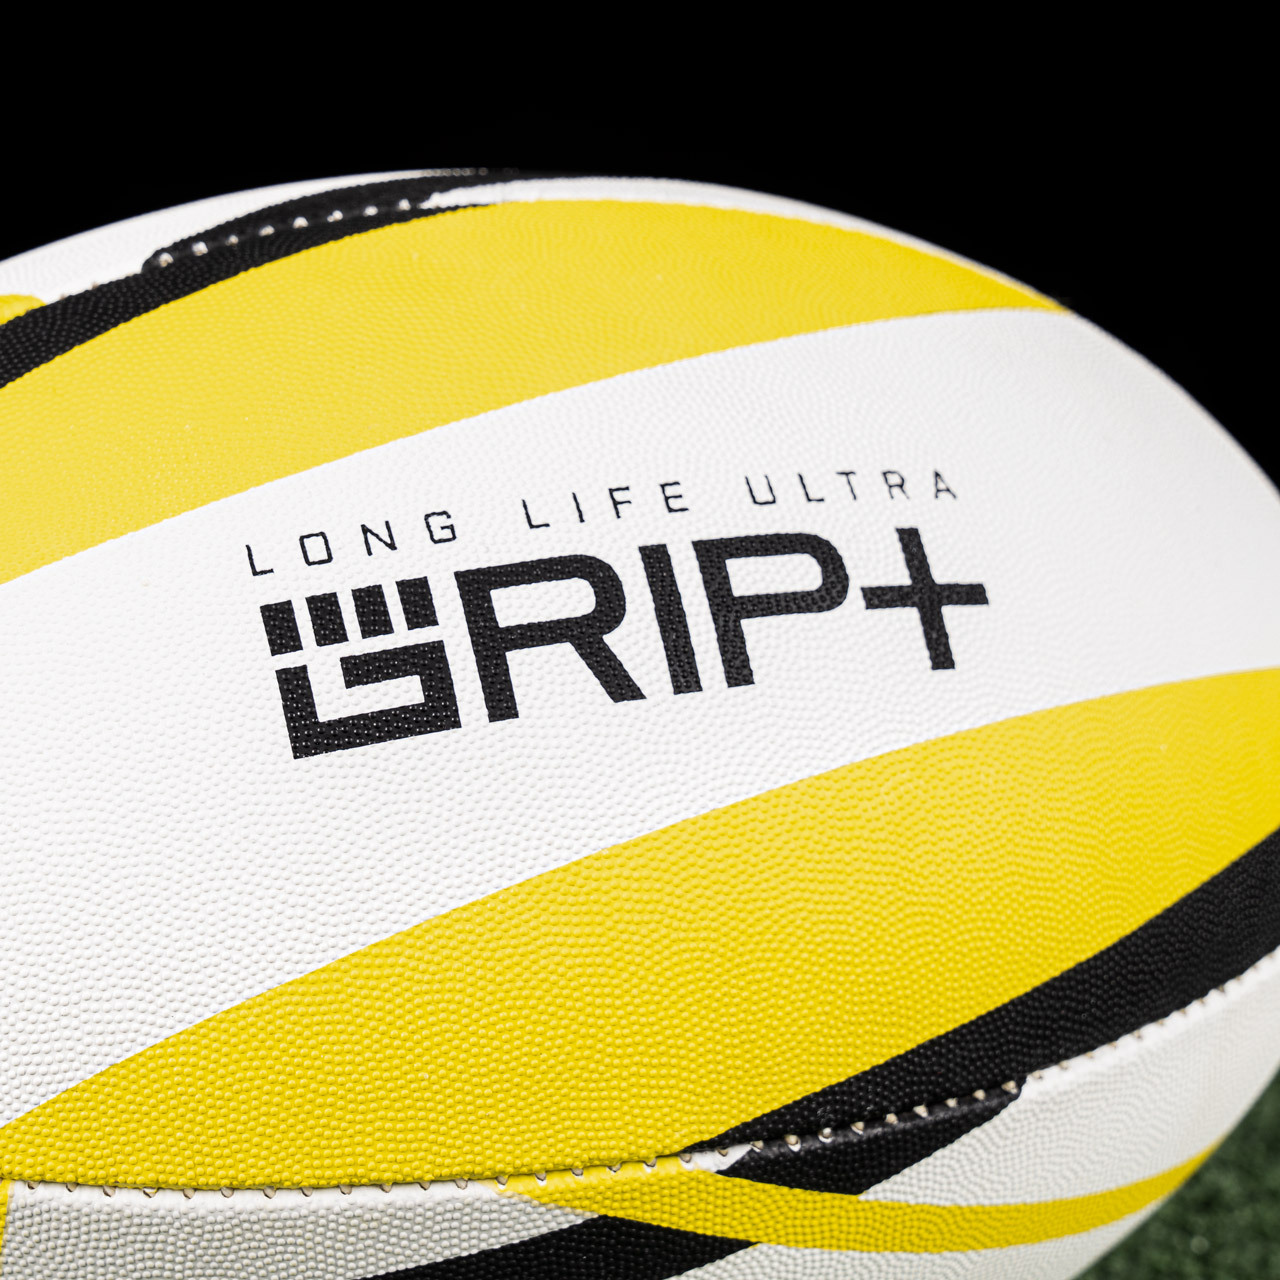 FORZA Match Rugby Ball [3 Sizes] [Size:: Size 3]